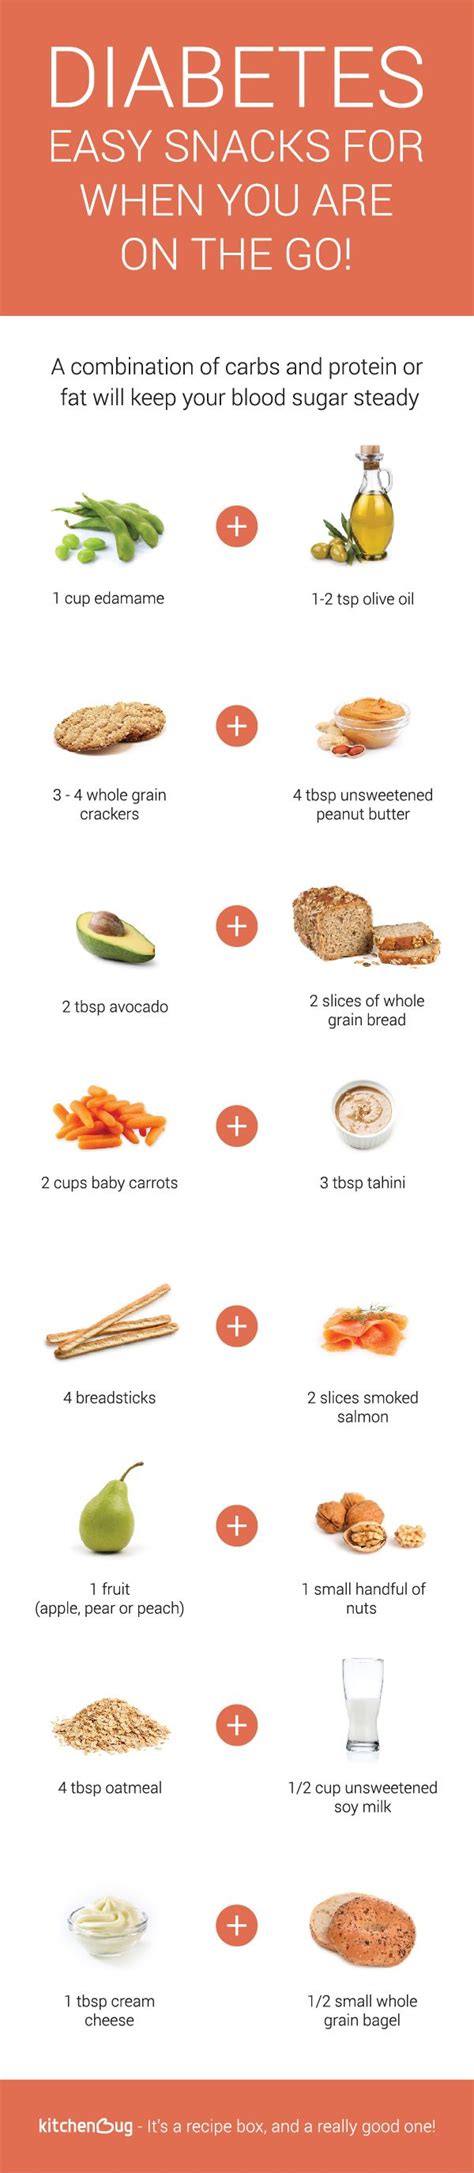 41 best diabetic info recipes images on pinterest; Simple snacks for Diabetics! Easy combinations that are ...